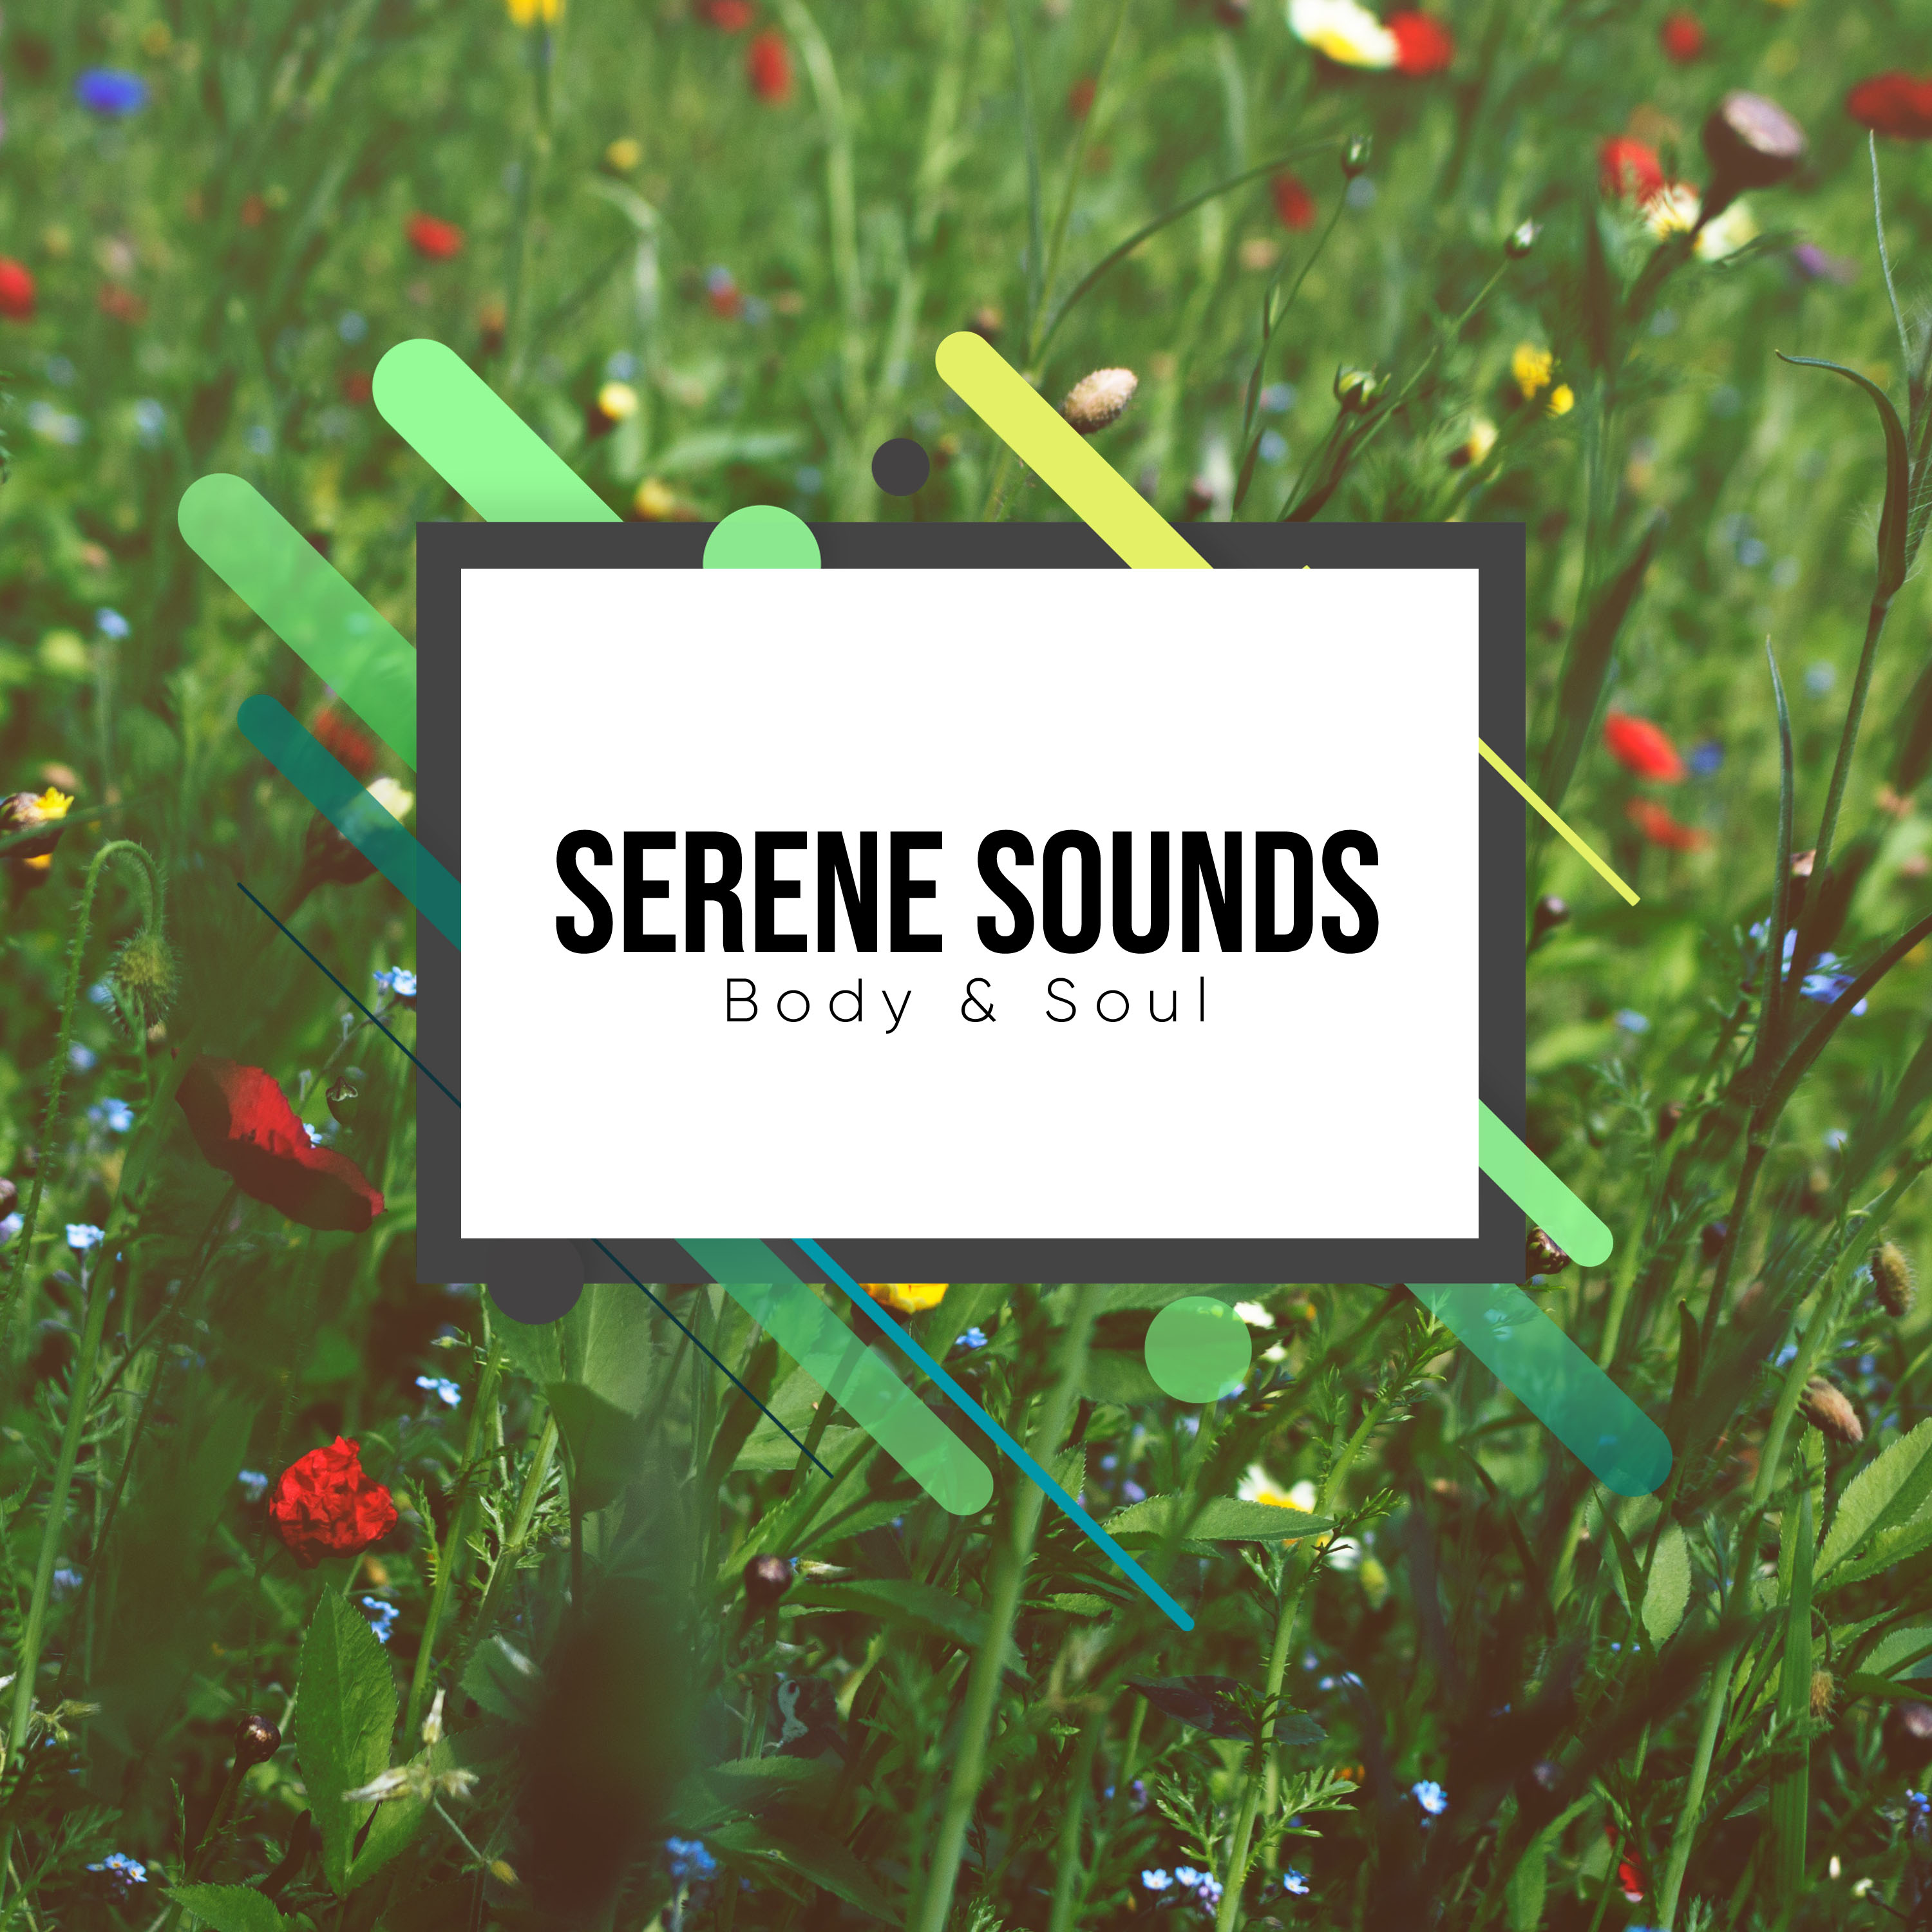 13 Loopable Ambience Tracks to Relax